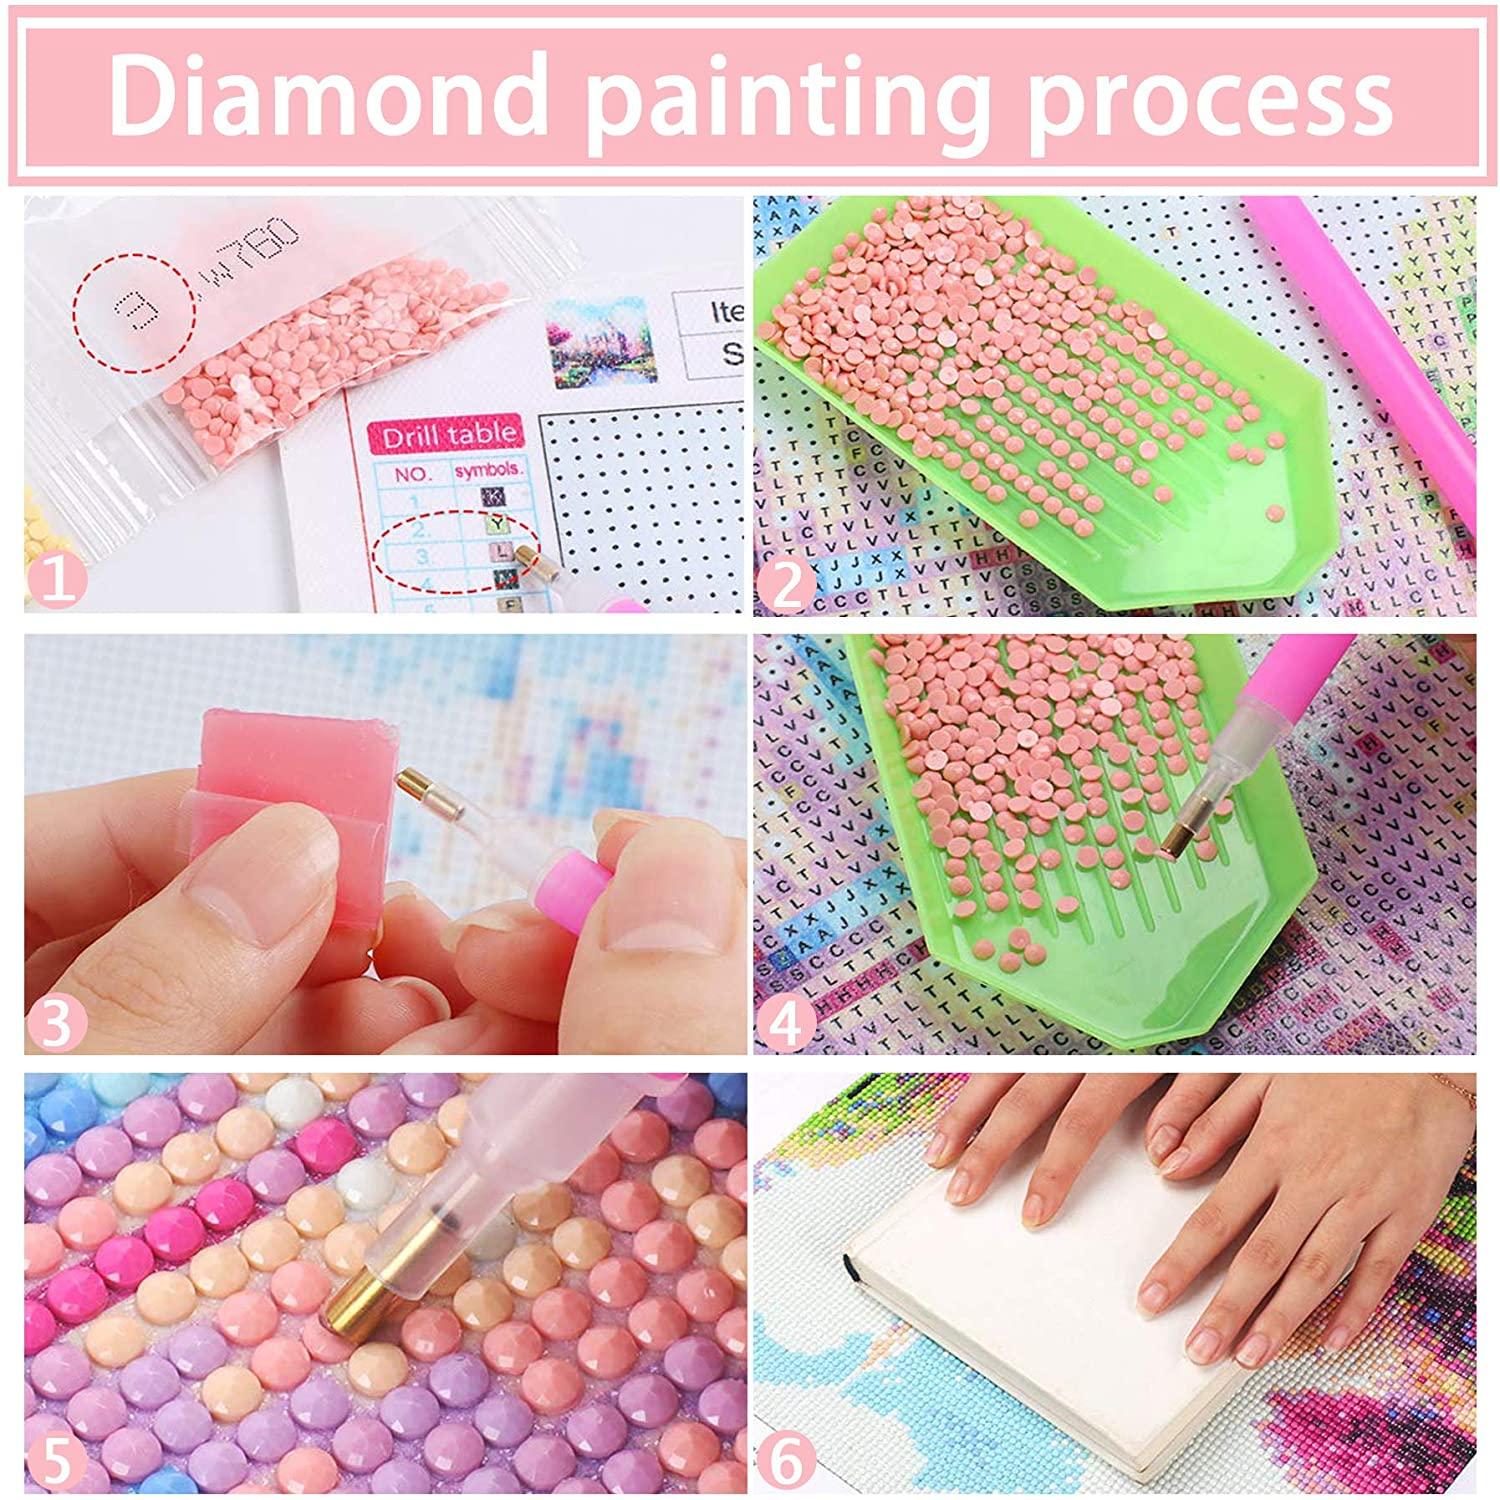 Bimkole 5D Diamond Painting Sea Sailing Full Drill by Number Kits DIY Rhinestone Pasted 12x16inch